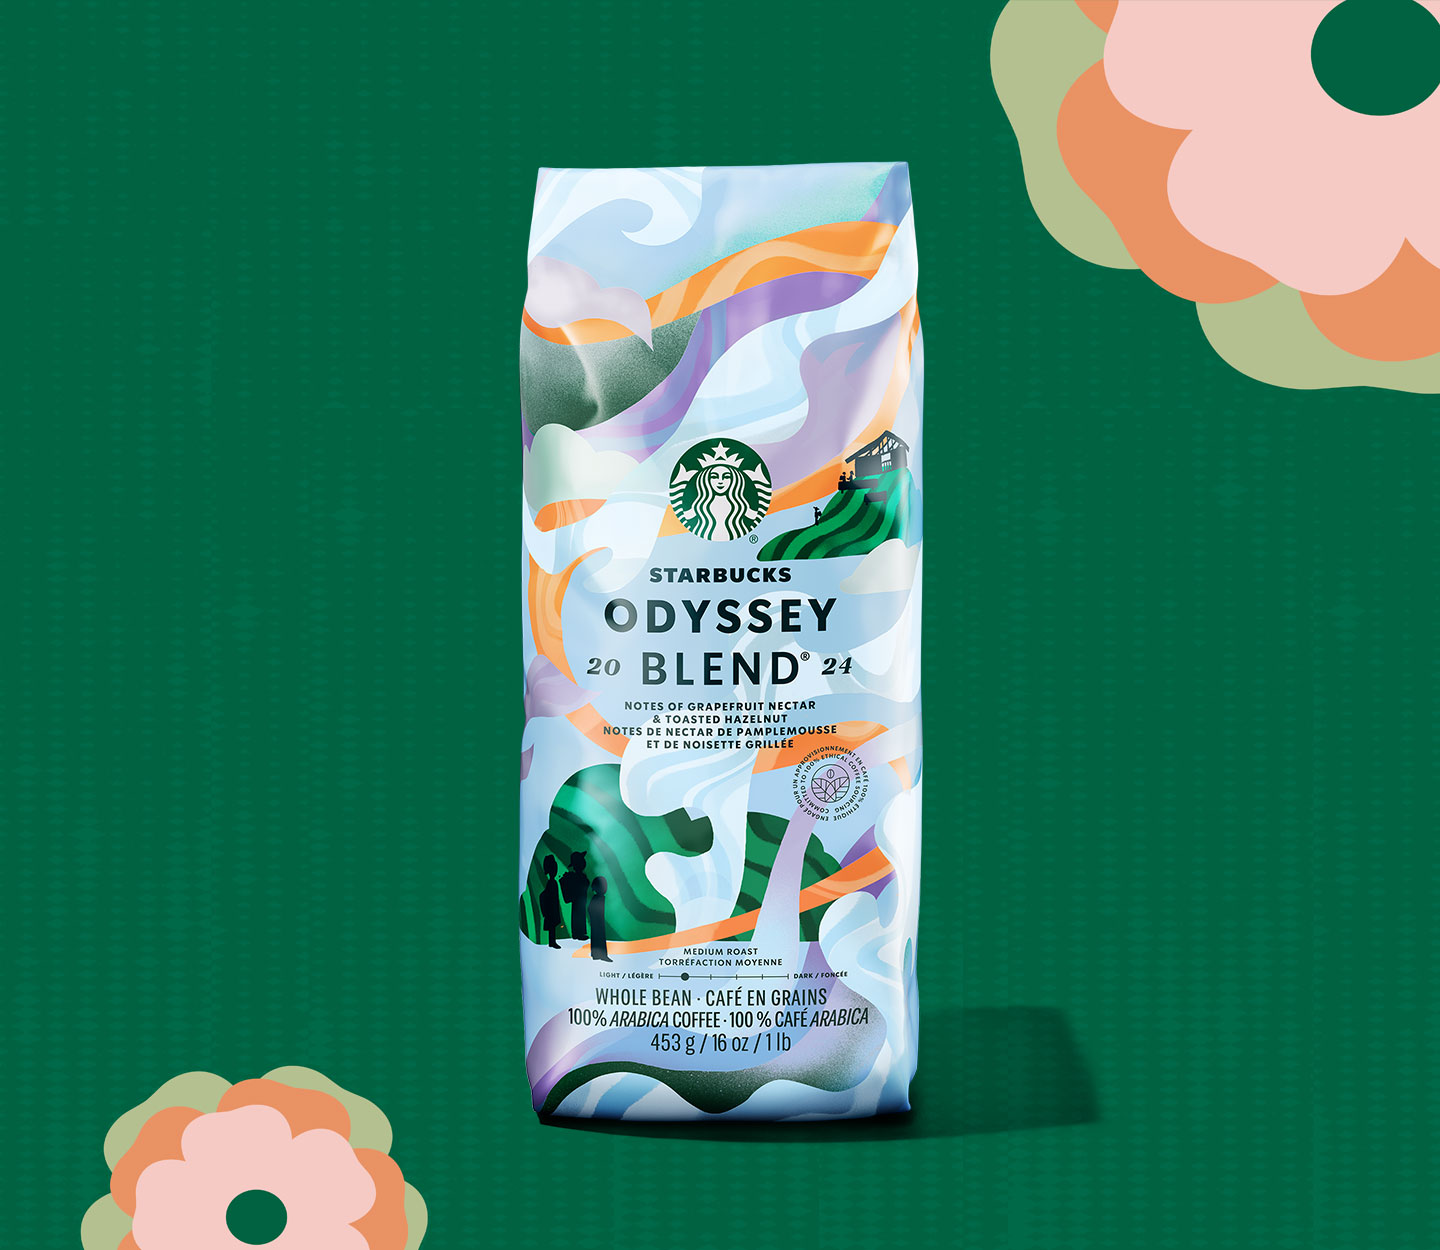 Coffee bag with an illustration of rolling hills in shades of green, blue and orange.